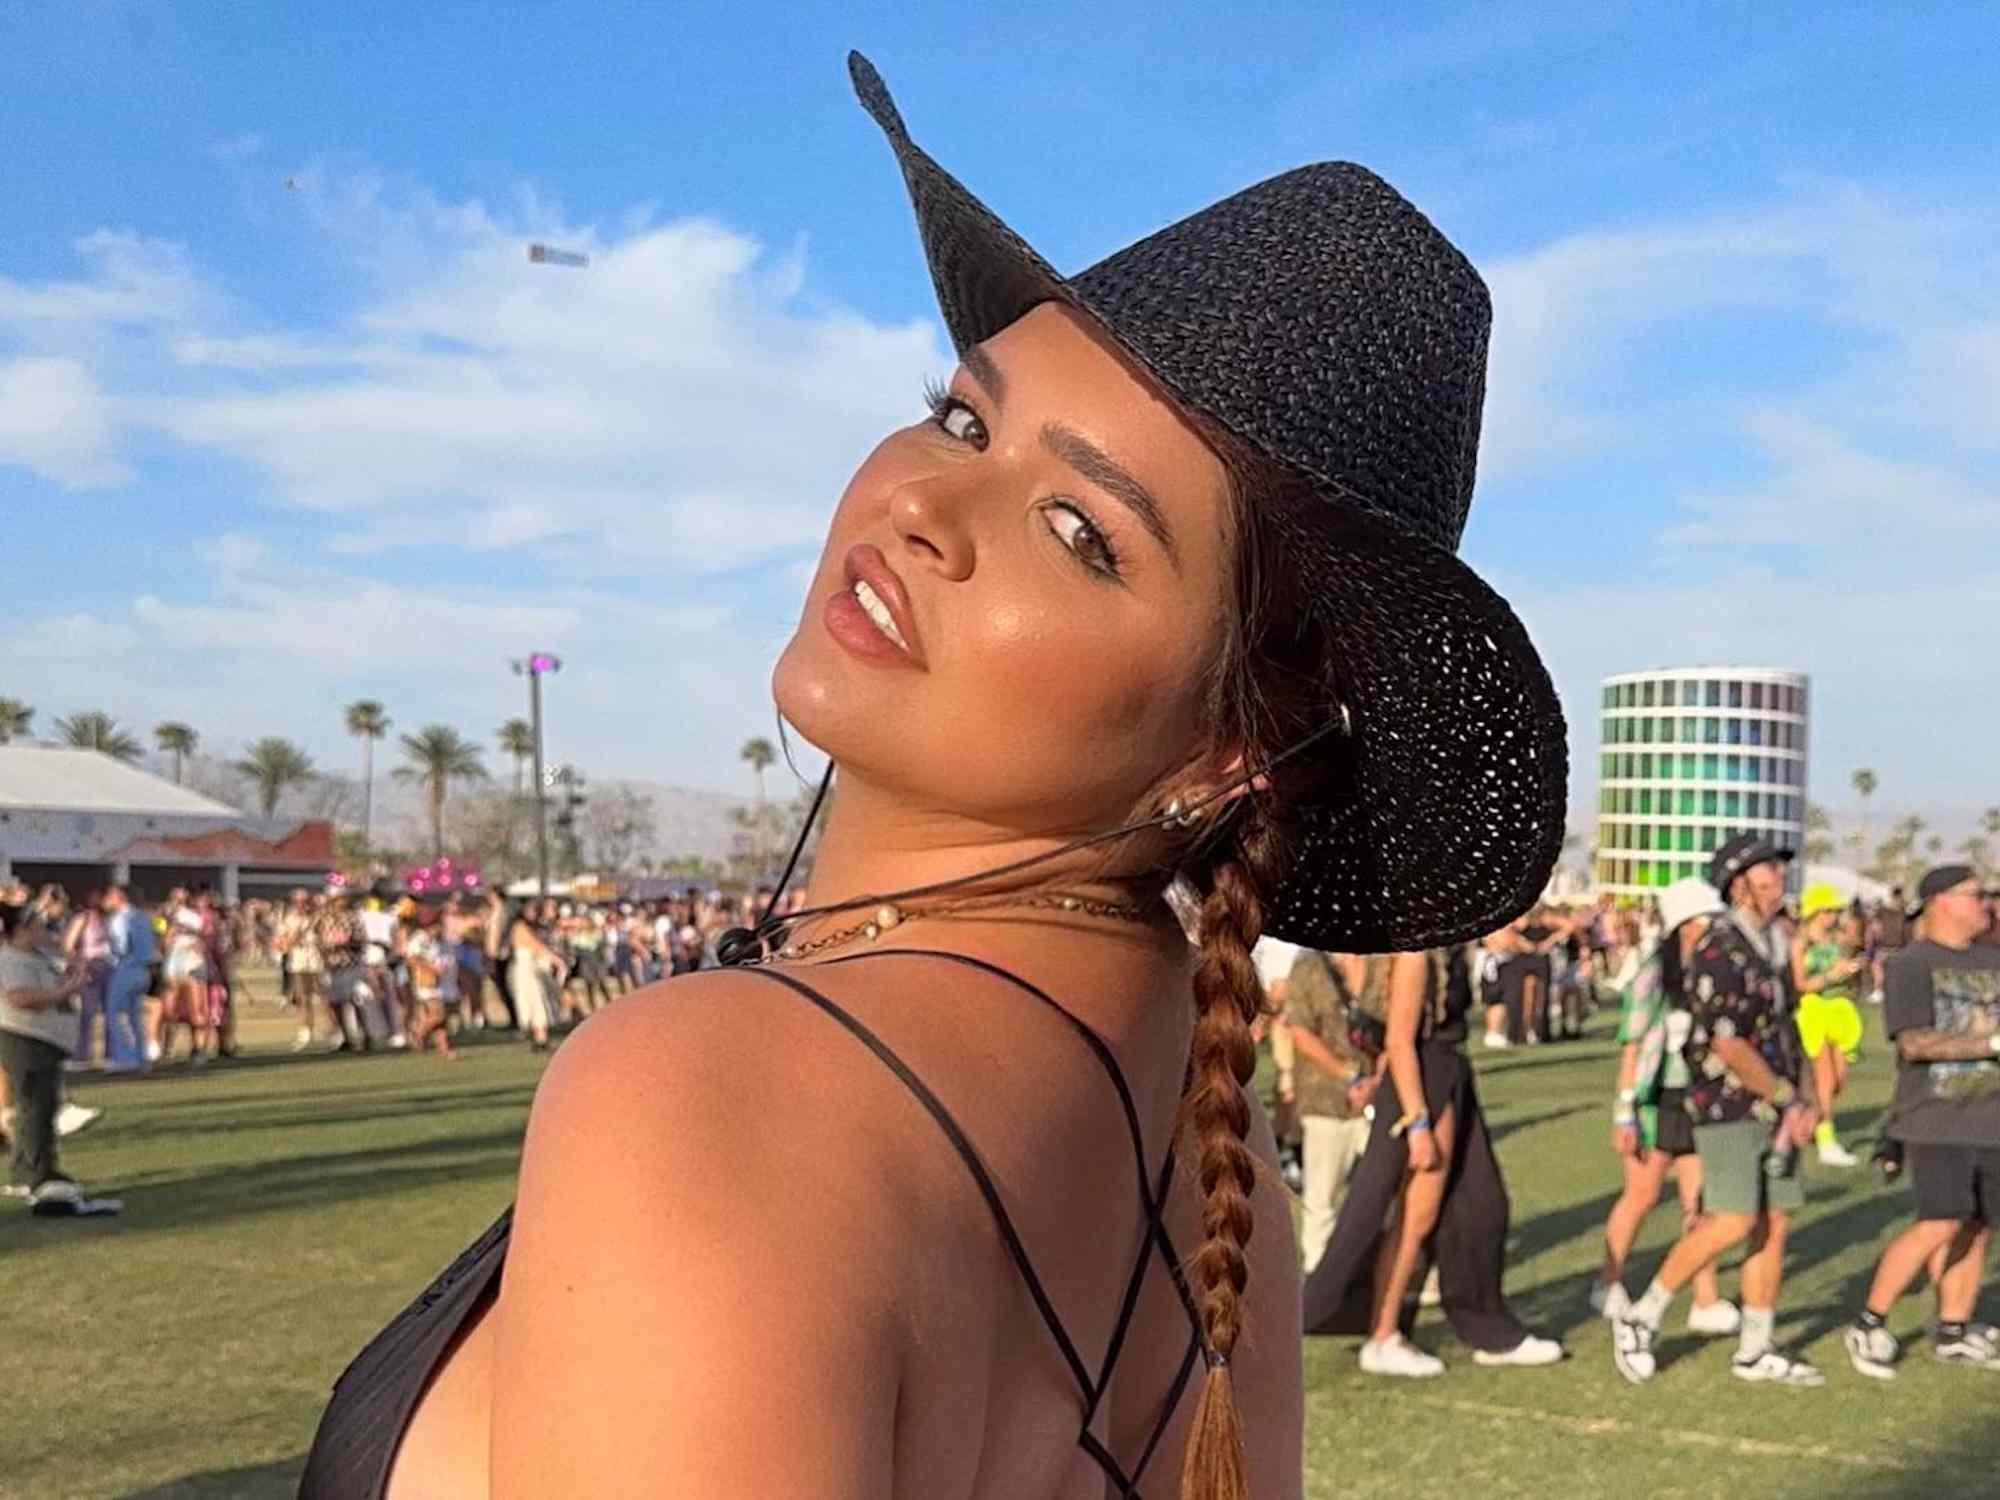 12 music festival outfit ideas to wear to coachella, gov ball, and more